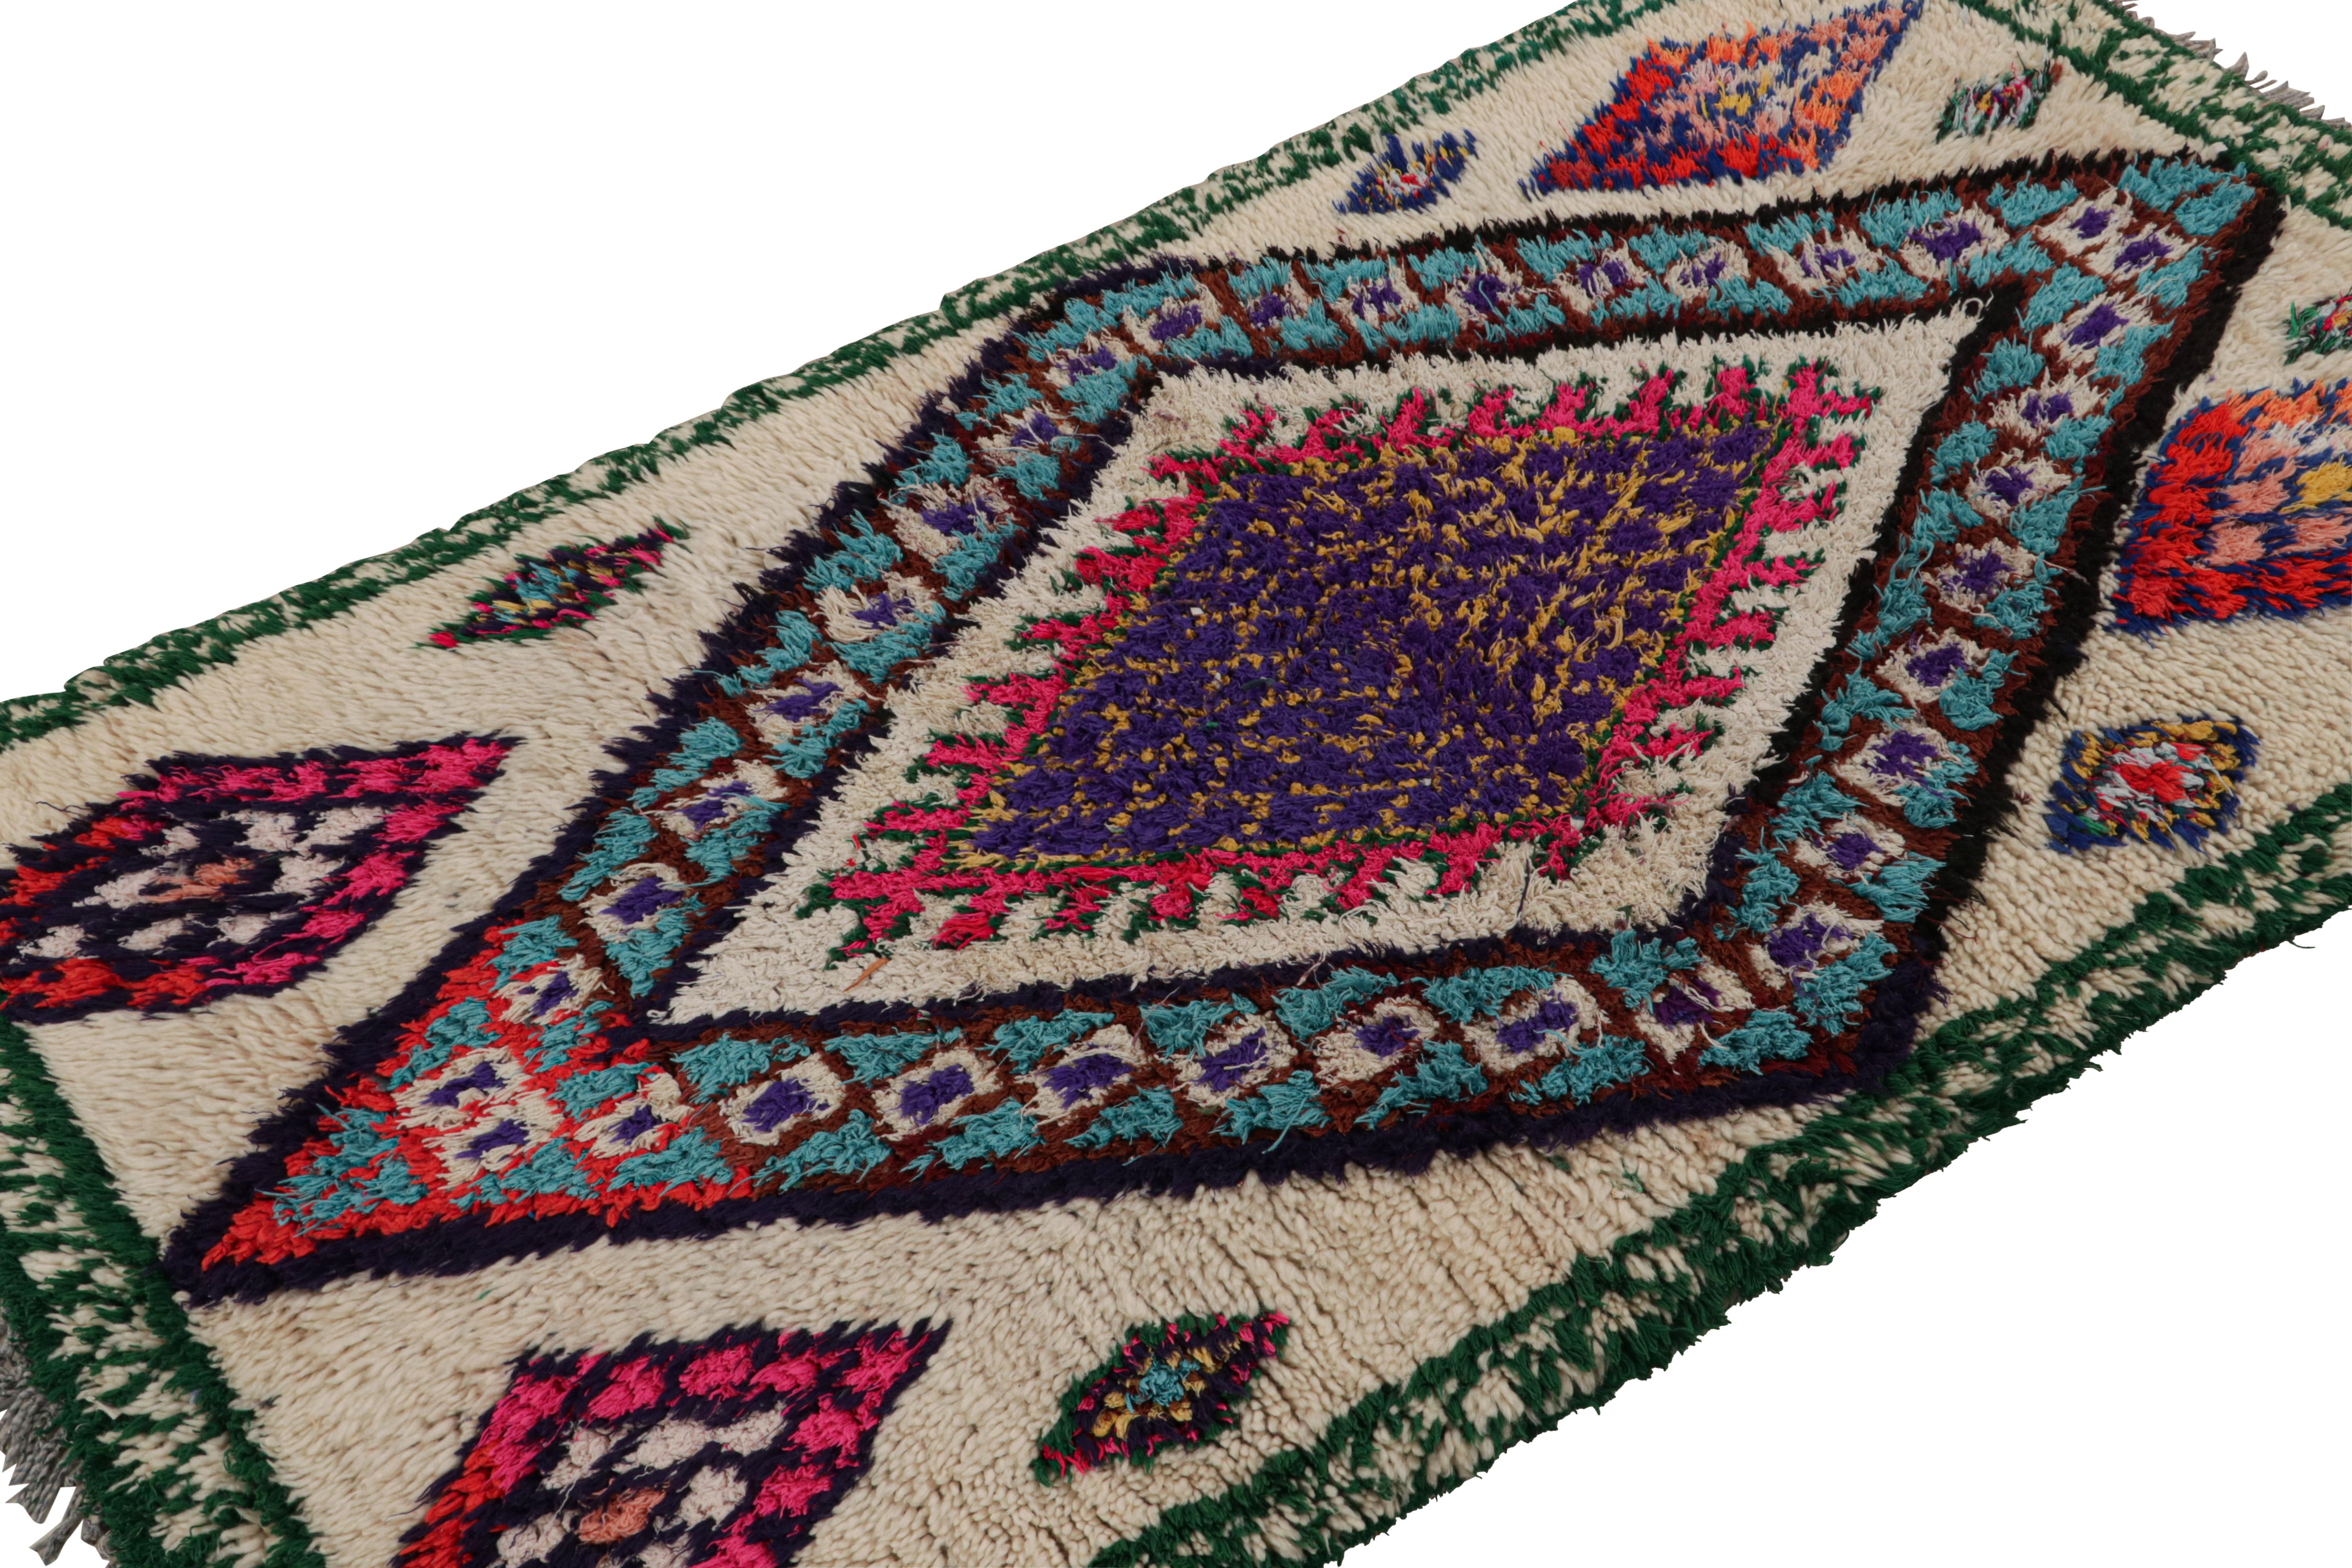 Hand-knotted in wool and cotton, circa 1950-1960, this 5x6 vintage Moroccan runner rug is believed to hail from the Azilal tribe. 

On the Design: 

This piece enjoys a lush high pile with polychromatic primitivist Berber geometric diamond medallion